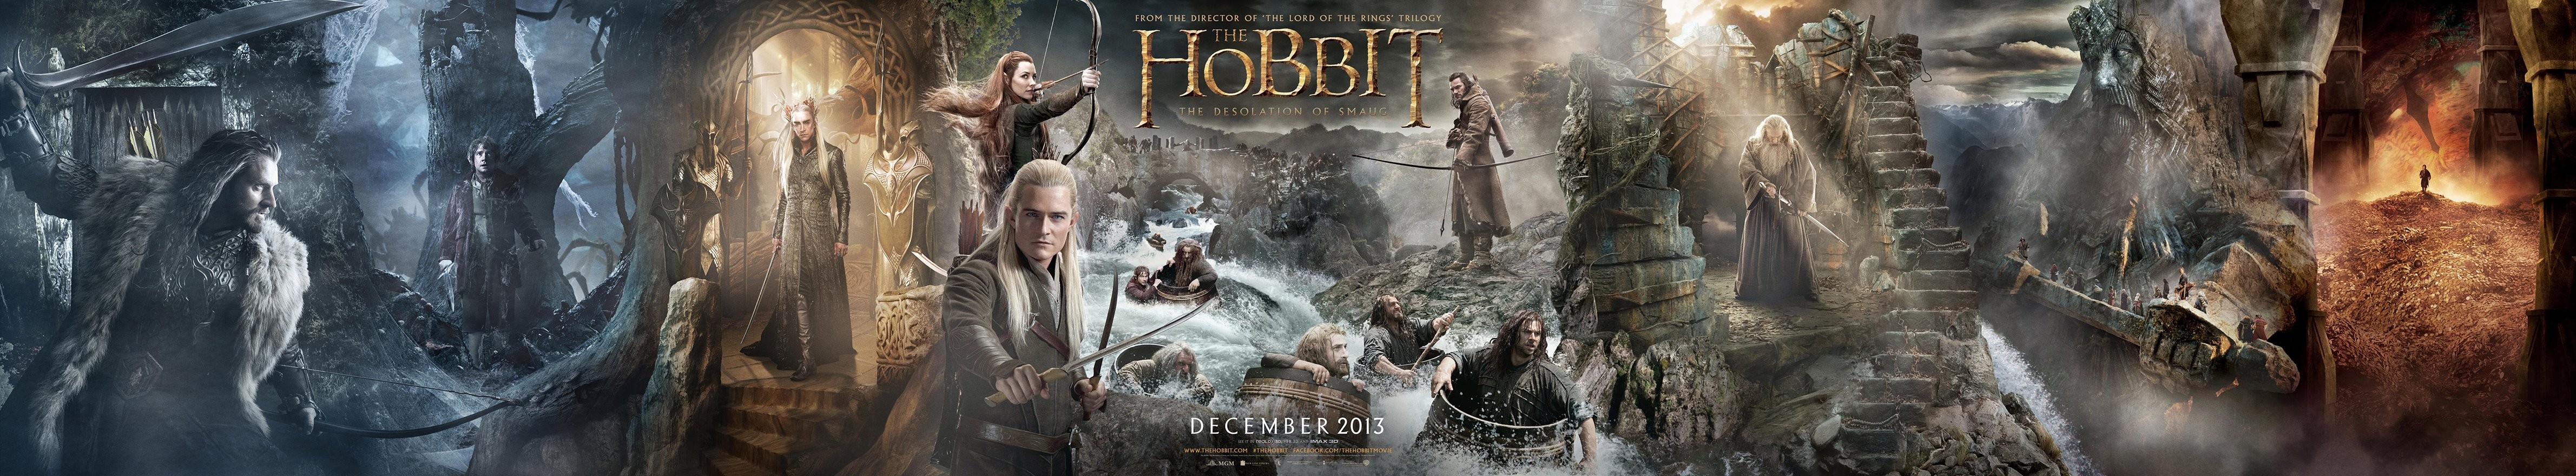 Mega Sized Movie Poster Image for The Hobbit: The Desolation of Smaug (#23 of 33)